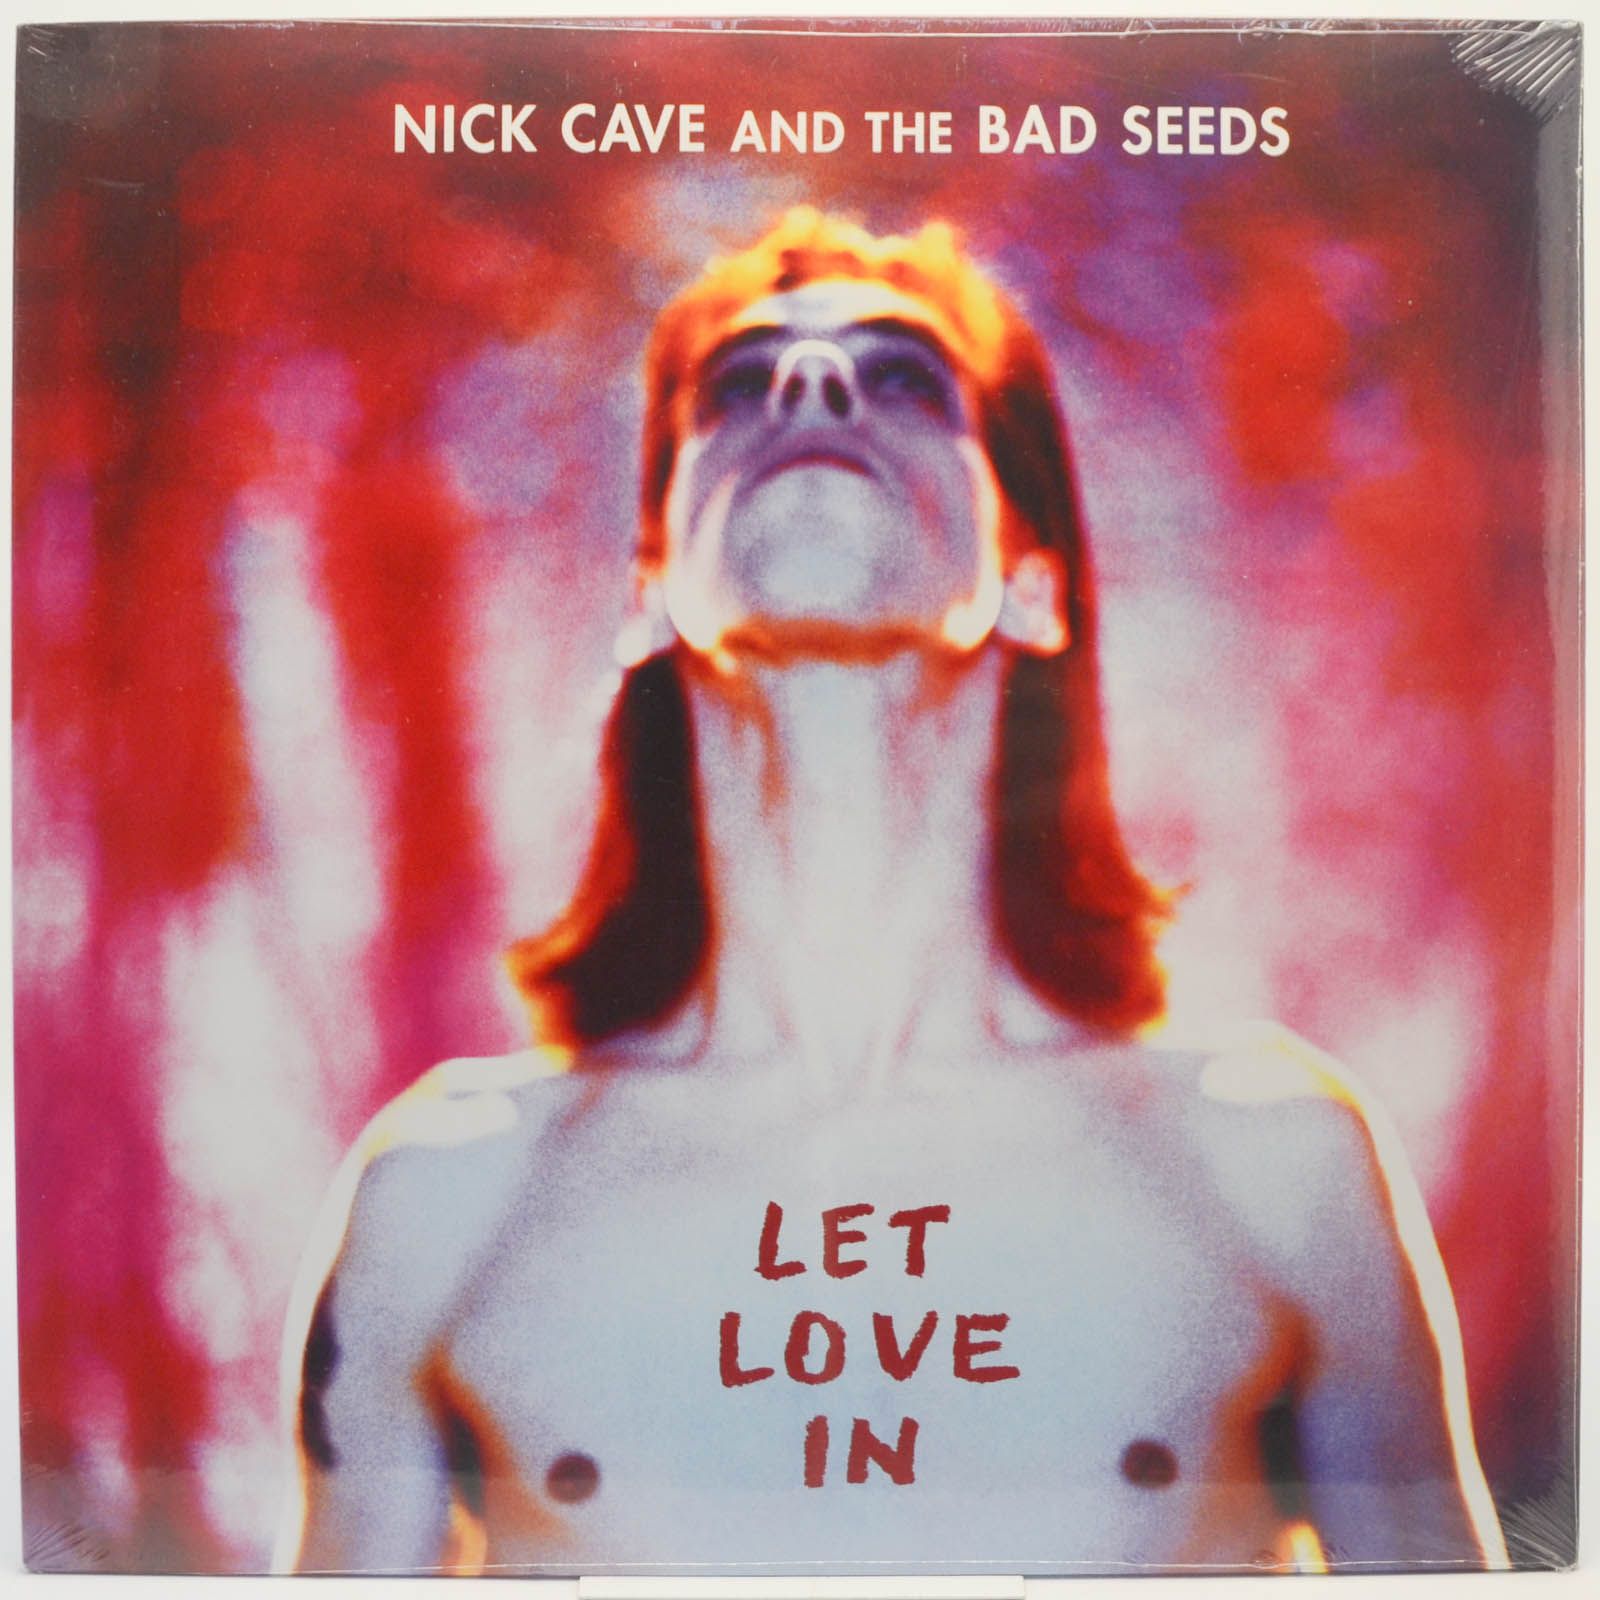 Nick Cave And The Bad Seeds — Let Love In, 1994